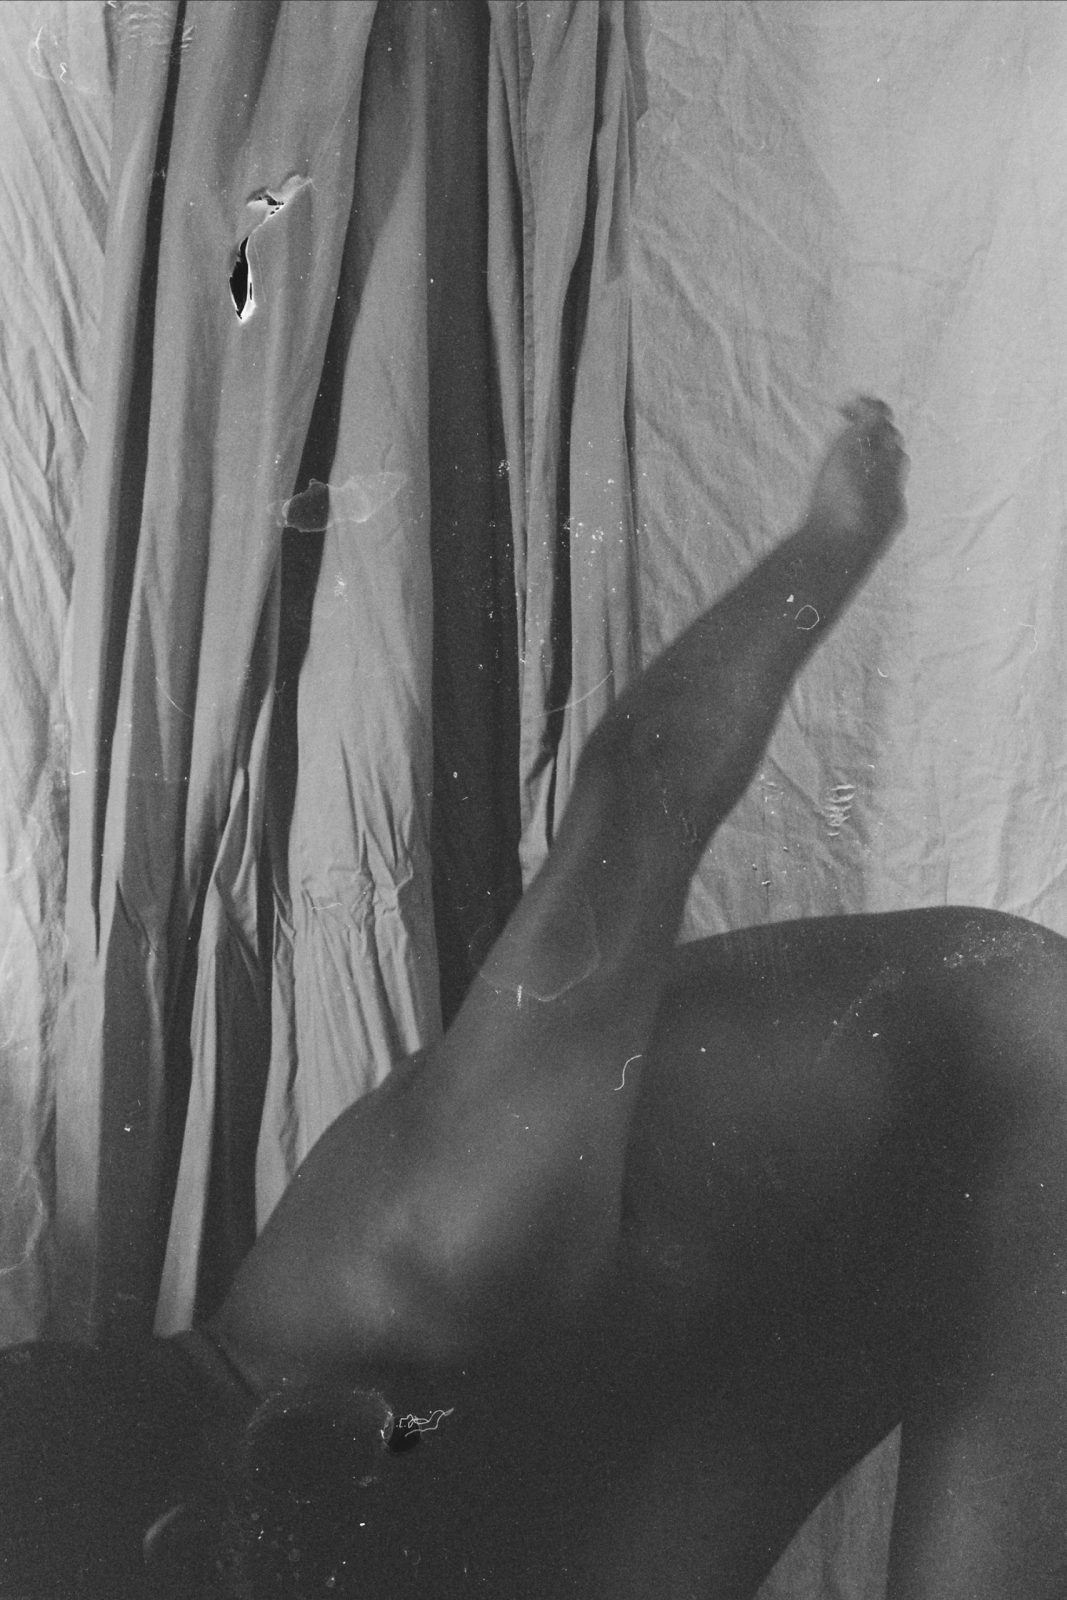 black and white image of a person bent forward, naked, with one arm up